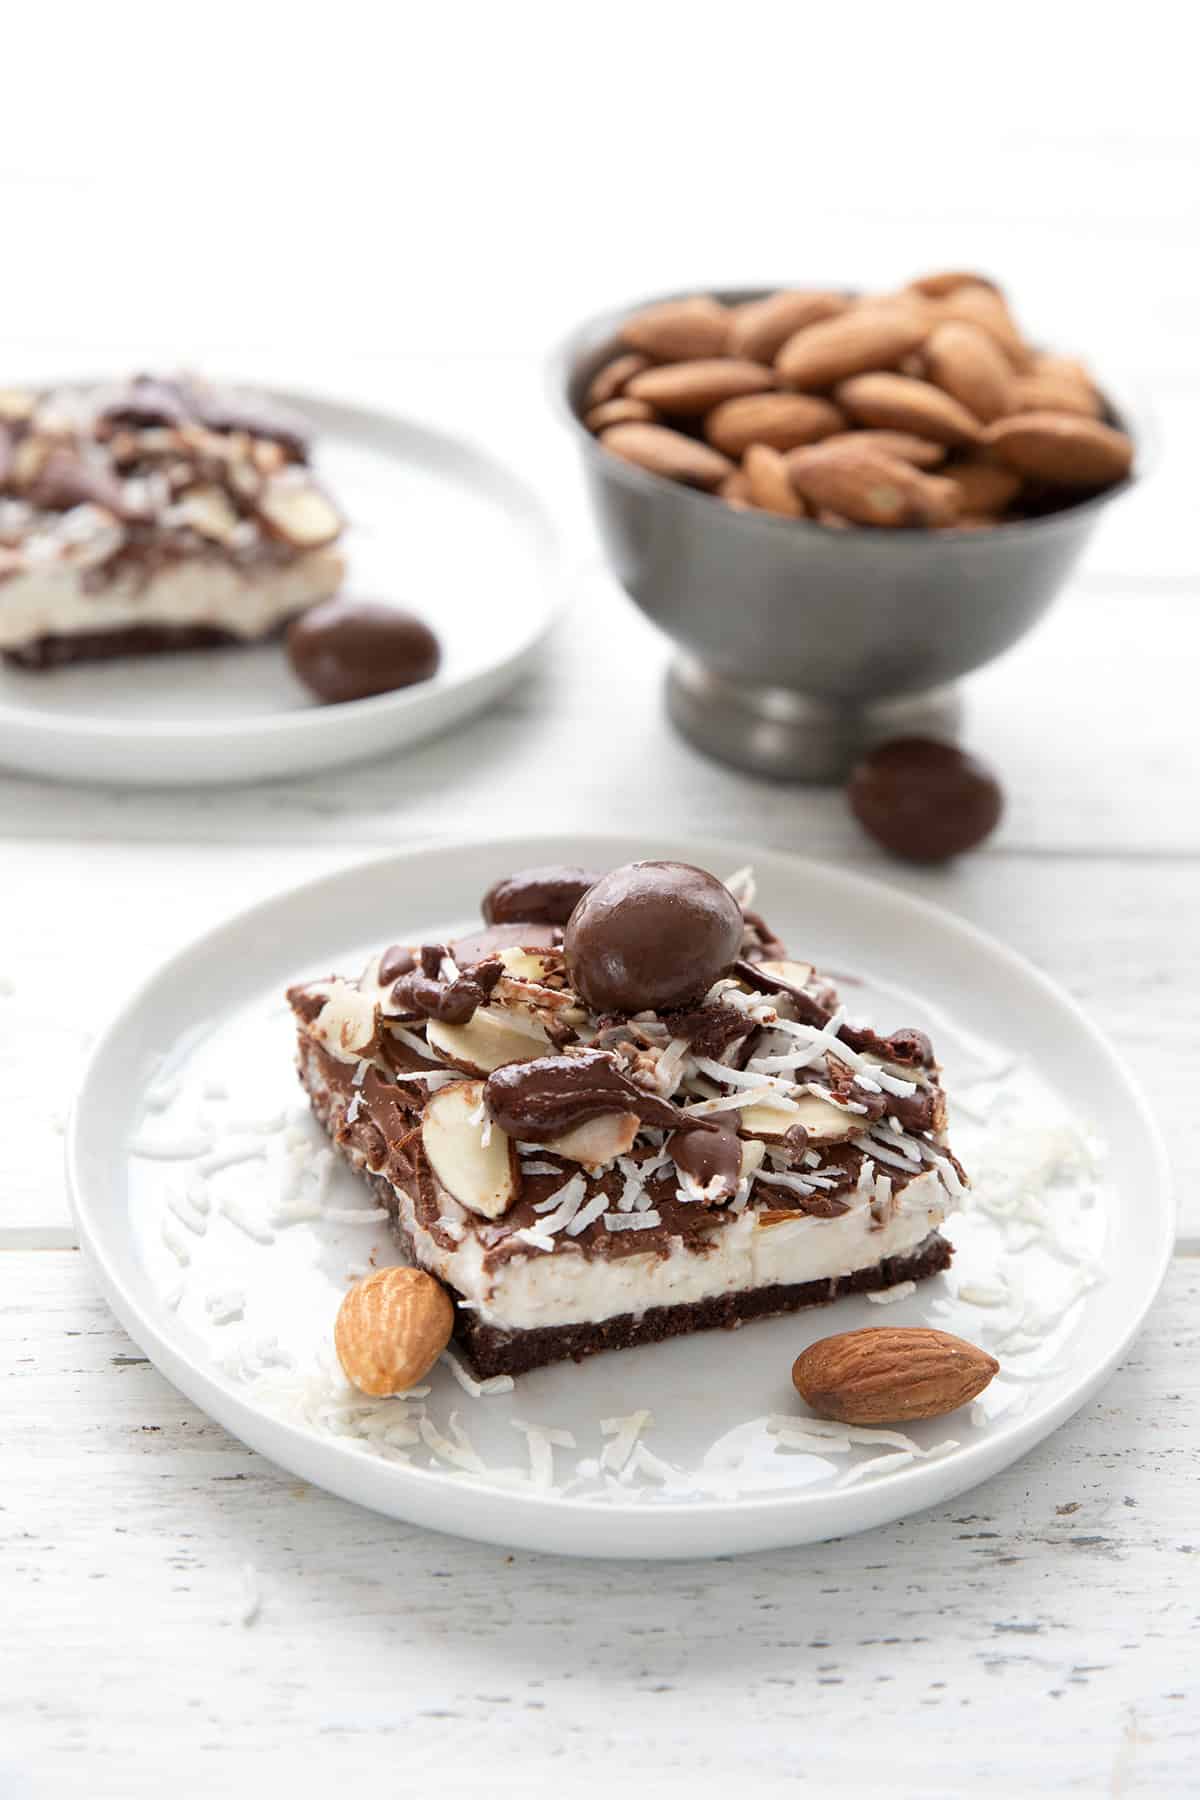 A no bake keto cheesecake bar on a white plate with a bowl of almonds in the background.